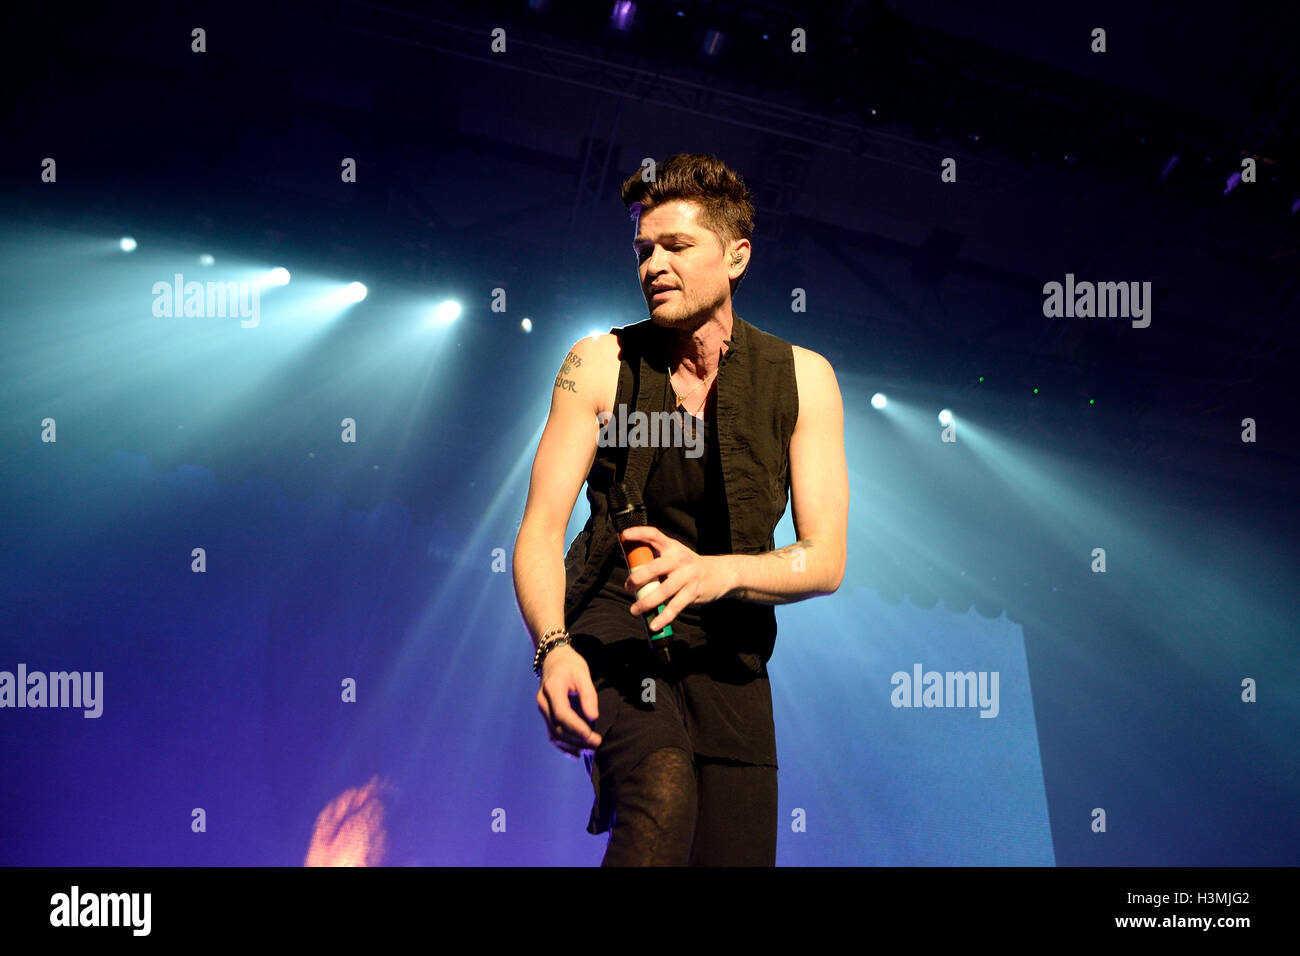 BARCELONA - MAR 30: The Script (band) performs at St. Jordi Club stage on March 18, 2015 in Barcelona, Spain. Stock Photo